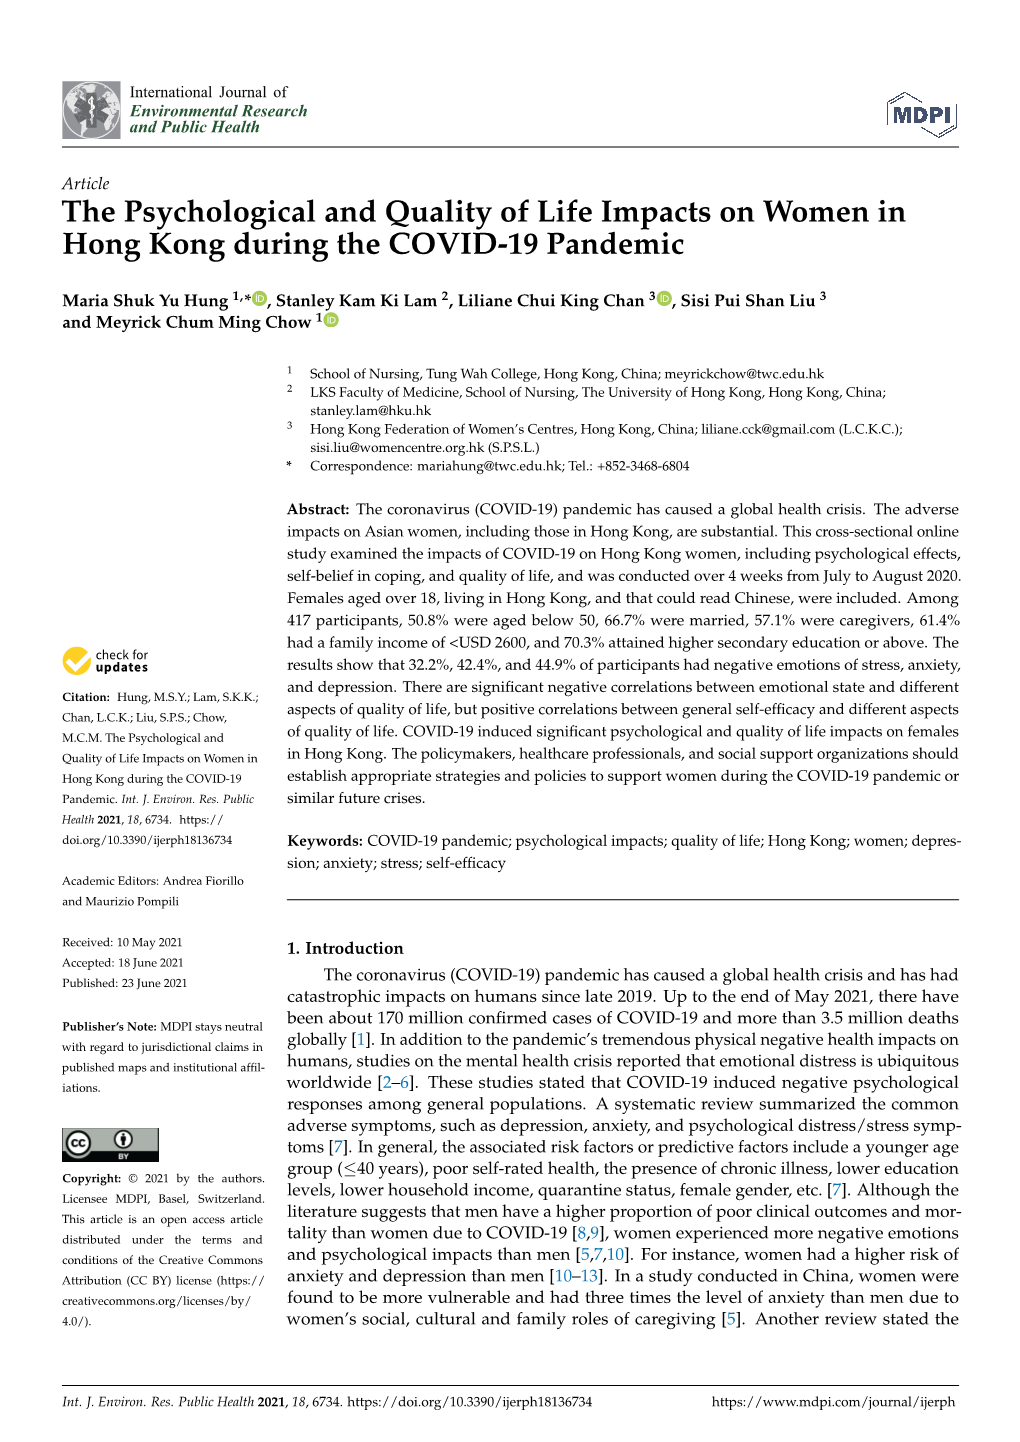 The Psychological and Quality of Life Impacts on Women in Hong Kong During the COVID-19 Pandemic